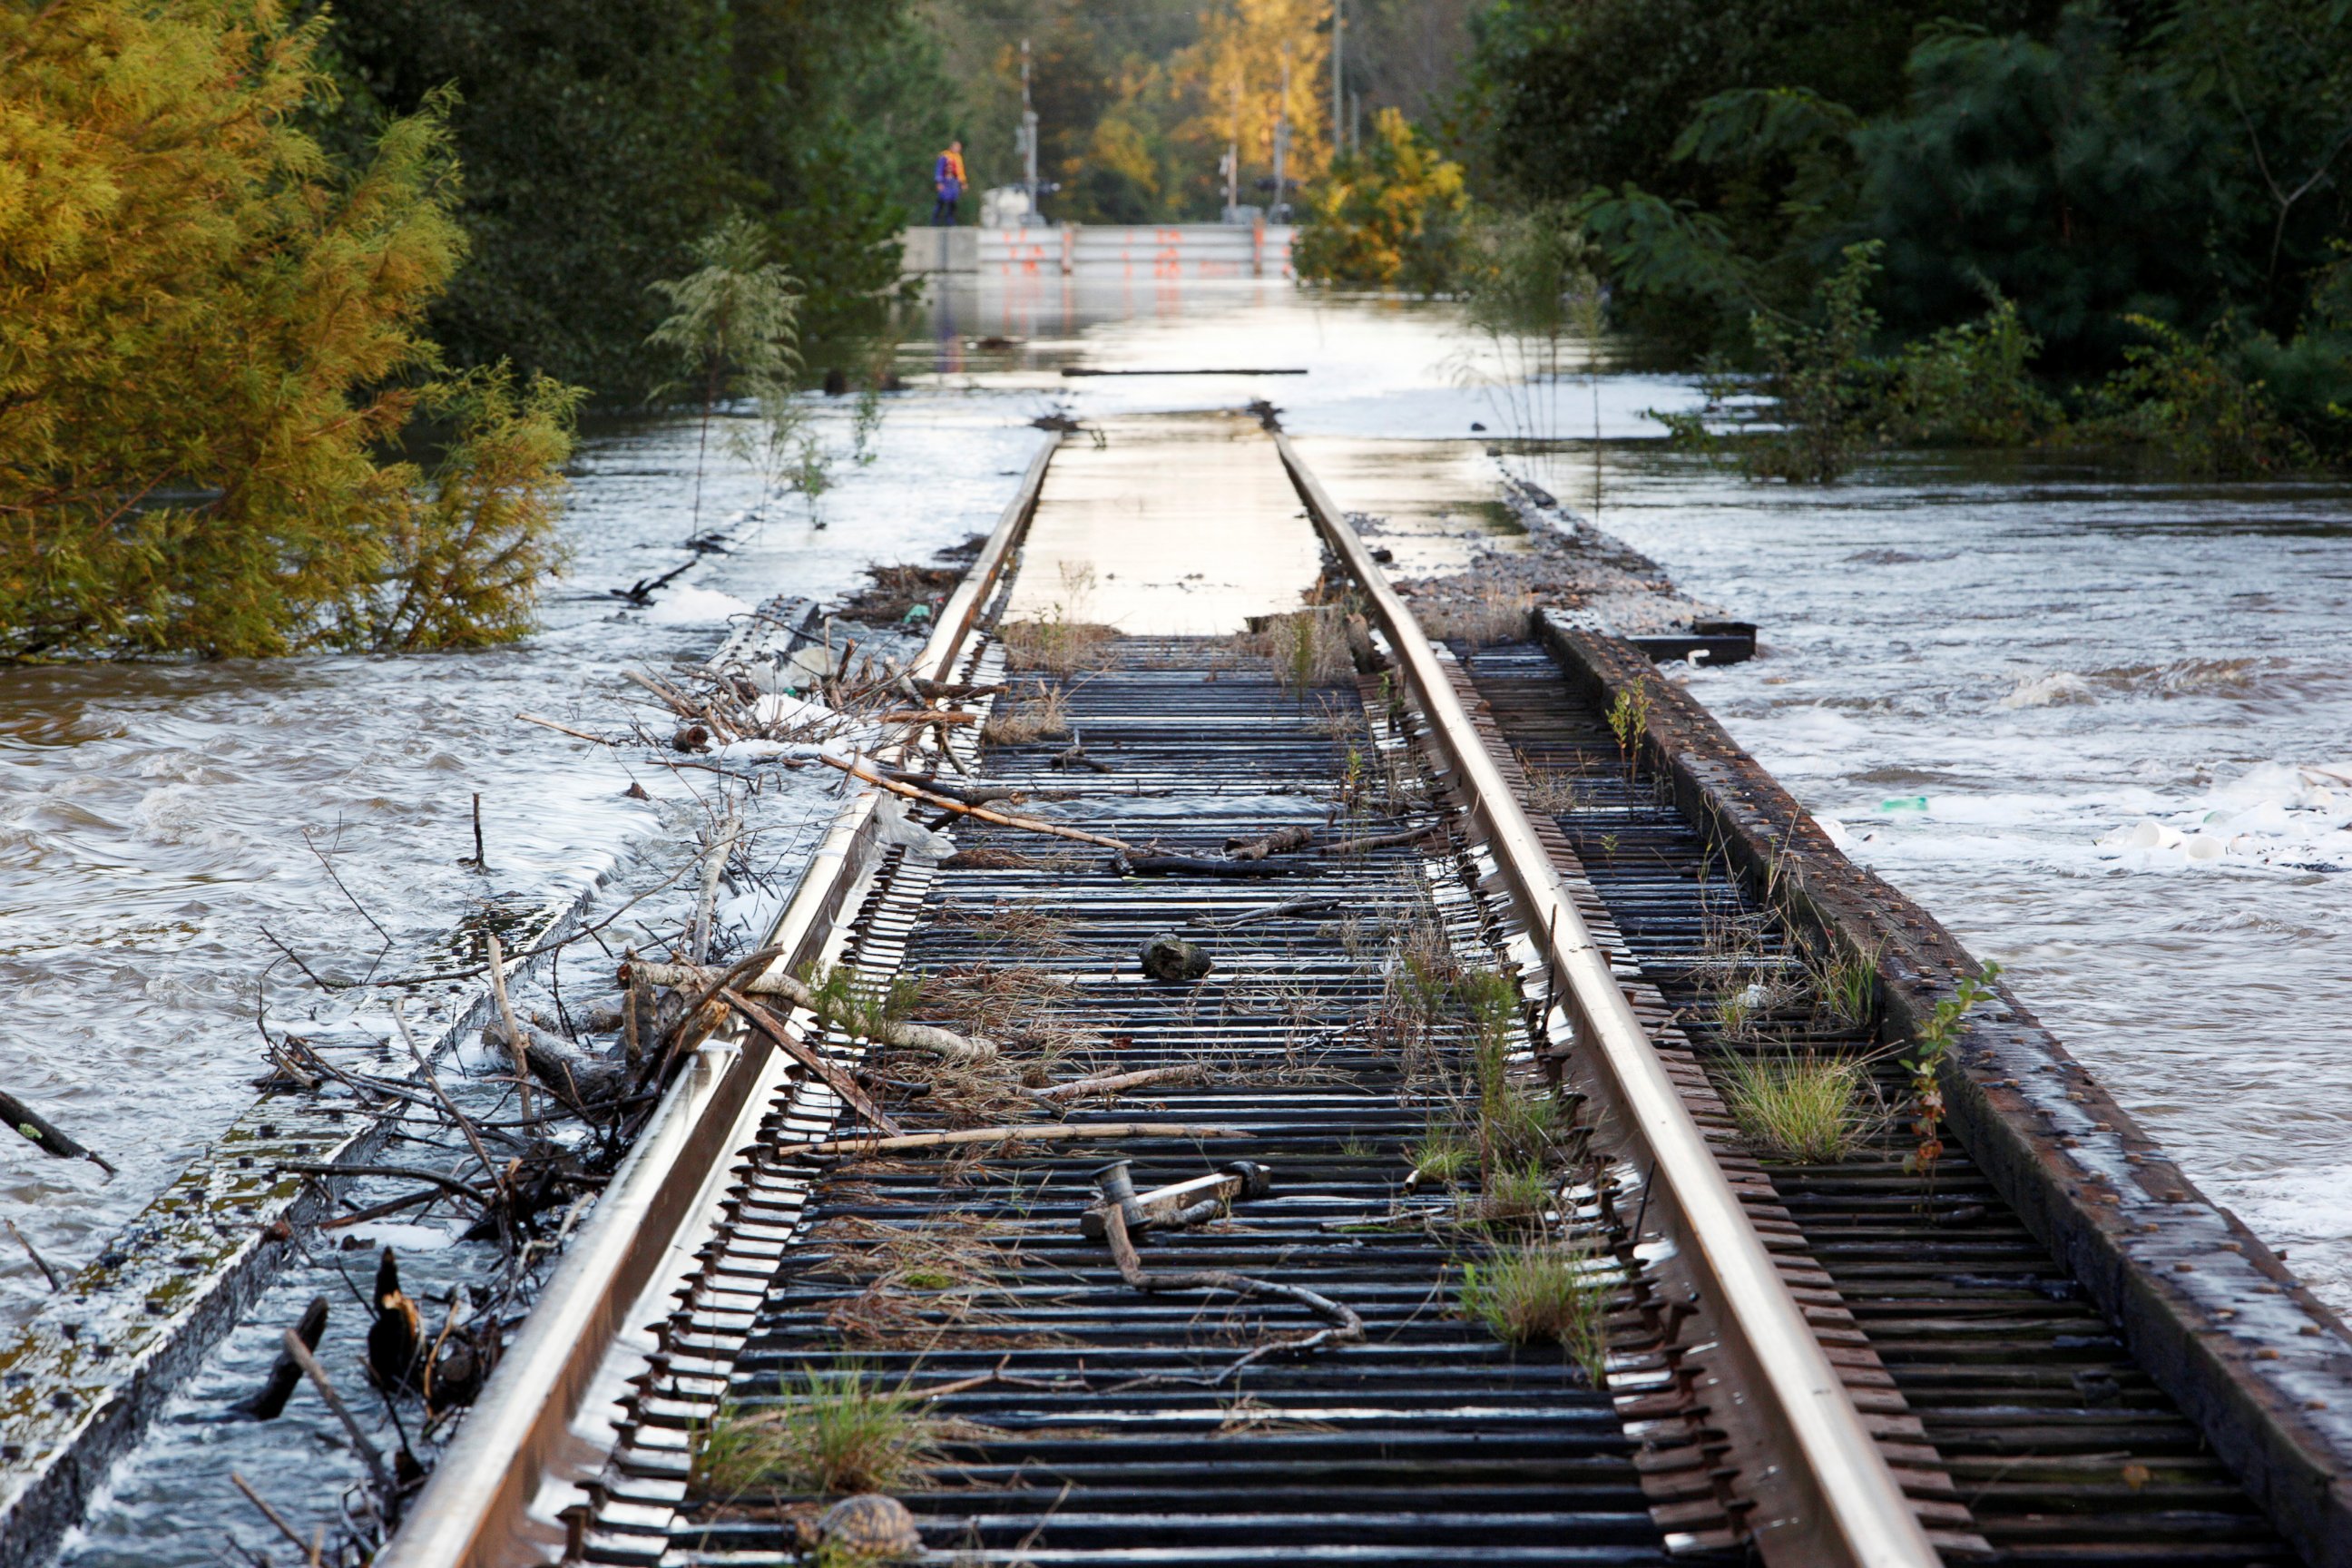 PHOTO: Debris swept downriver by the rising Tar River litter a flooded rail bridge crossing the river from Tarboro into Princeville as the river crests in the aftermath of Hurricane Matthew, in Tarboro, North Carolina, on Oct. 13, 2016. 